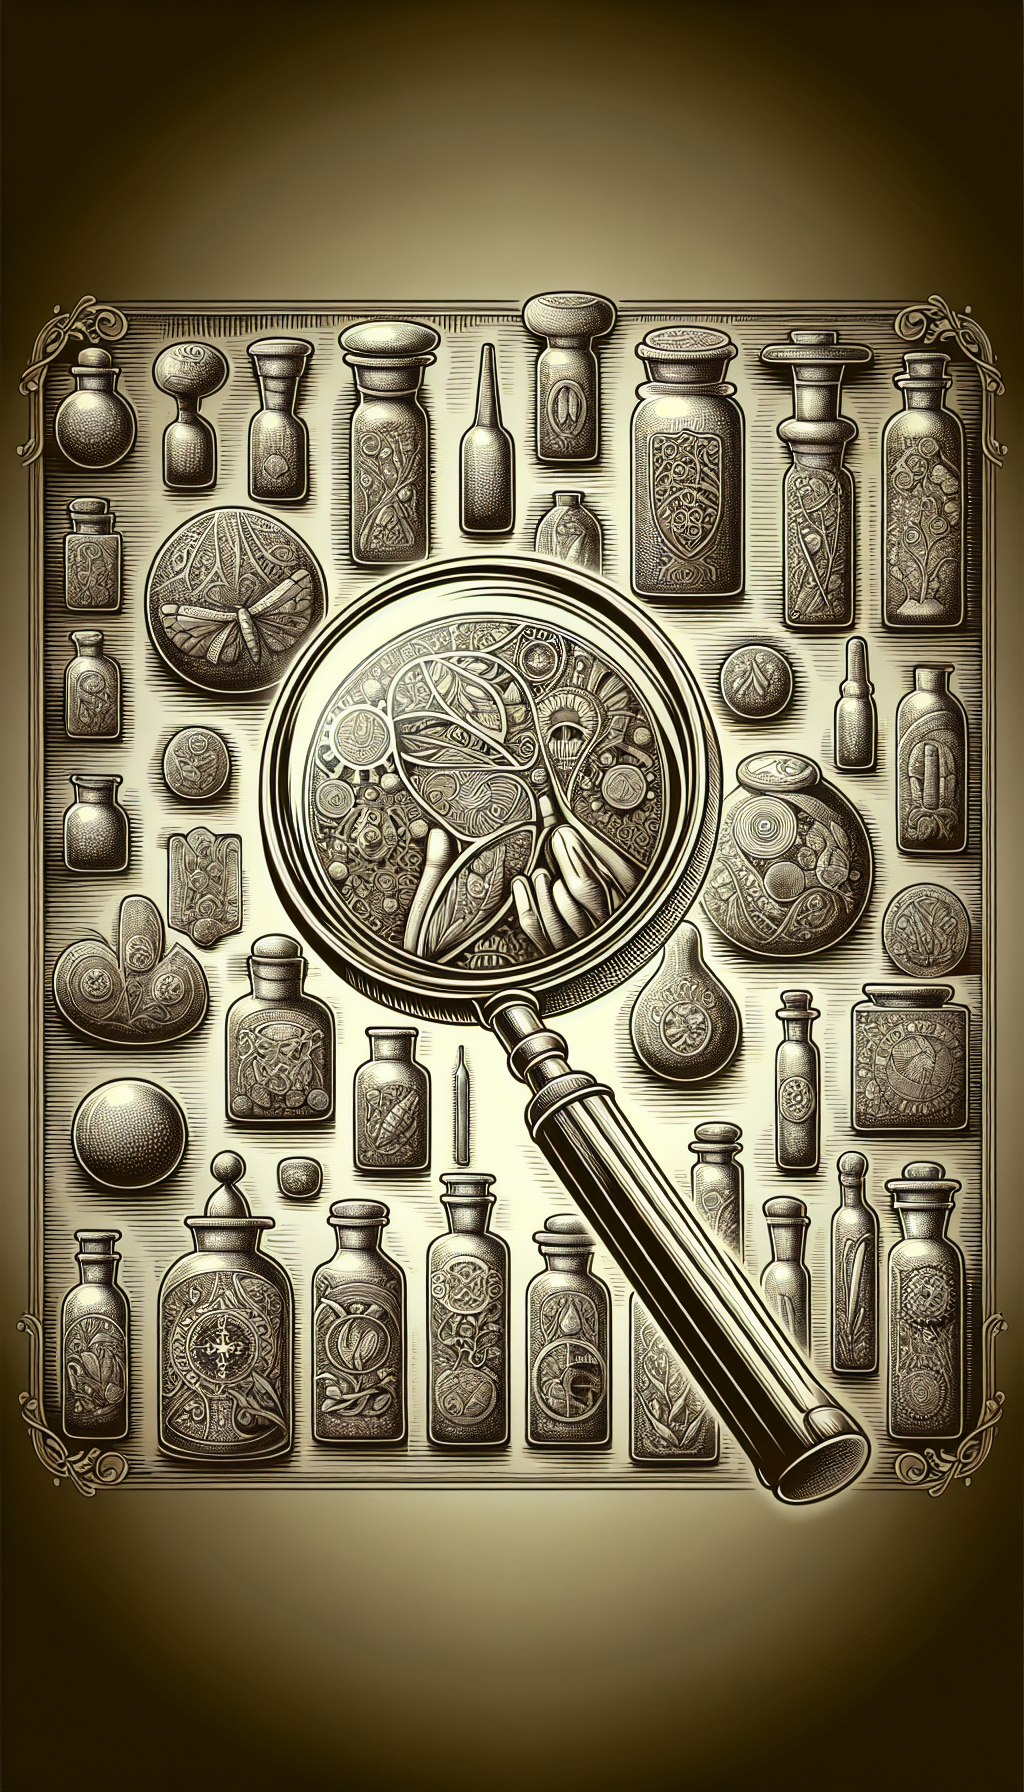 An alluring illustration shows a vintage magnifying glass hovering over an array of meticulously detailed old glass medicine bottles, each casting a reflection of its era's medical imagery. The diverse styles of the bottles represent the evolution of healthcare, with the magnifying glass symbolizing the scrutiny and expertise required for their historical identification.